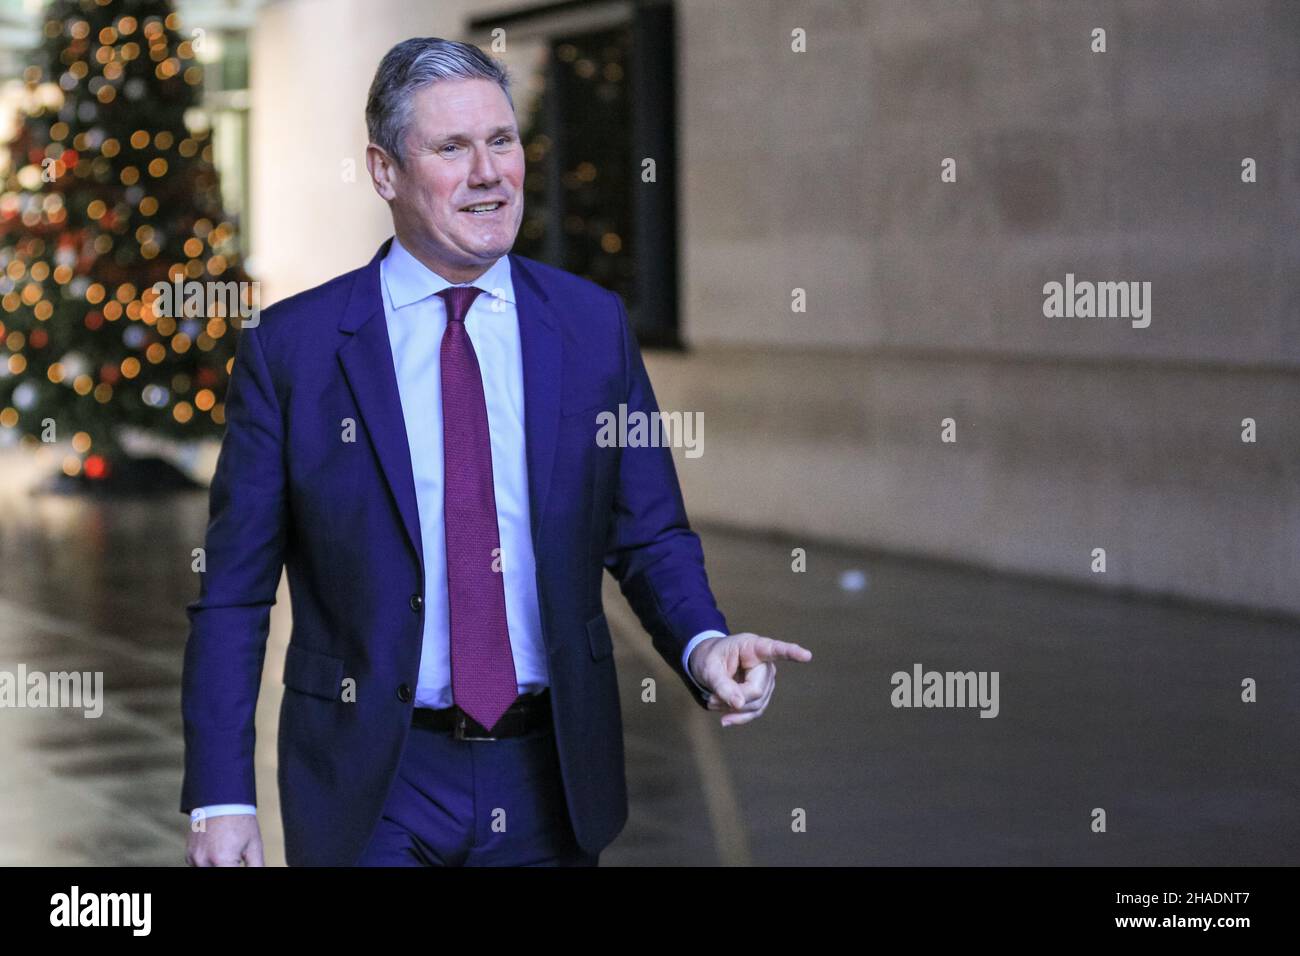 London, UK. 12th Dec, 2021. Sir Keir Starmer KCB QC MP, Leader of the Labour Party, exits the BBC headquarters in London and is interviewed, following an appearance at the Andrew Marr Show. Starmer reacted to the latest set of proposed covid measures, as well as PM Boris Johnson's stance on alleged Christmas parties at Downing Street and in several government departments. Credit: Imageplotter/Alamy Live News Stock Photo